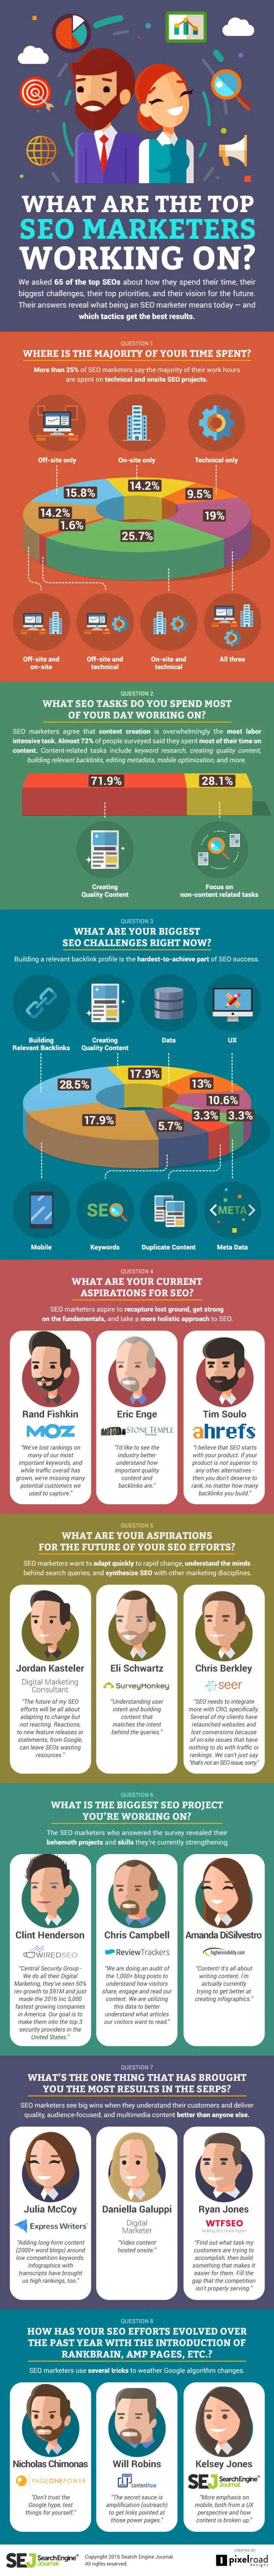 What Gets The Most Results for Top SEOs? - #Infographic